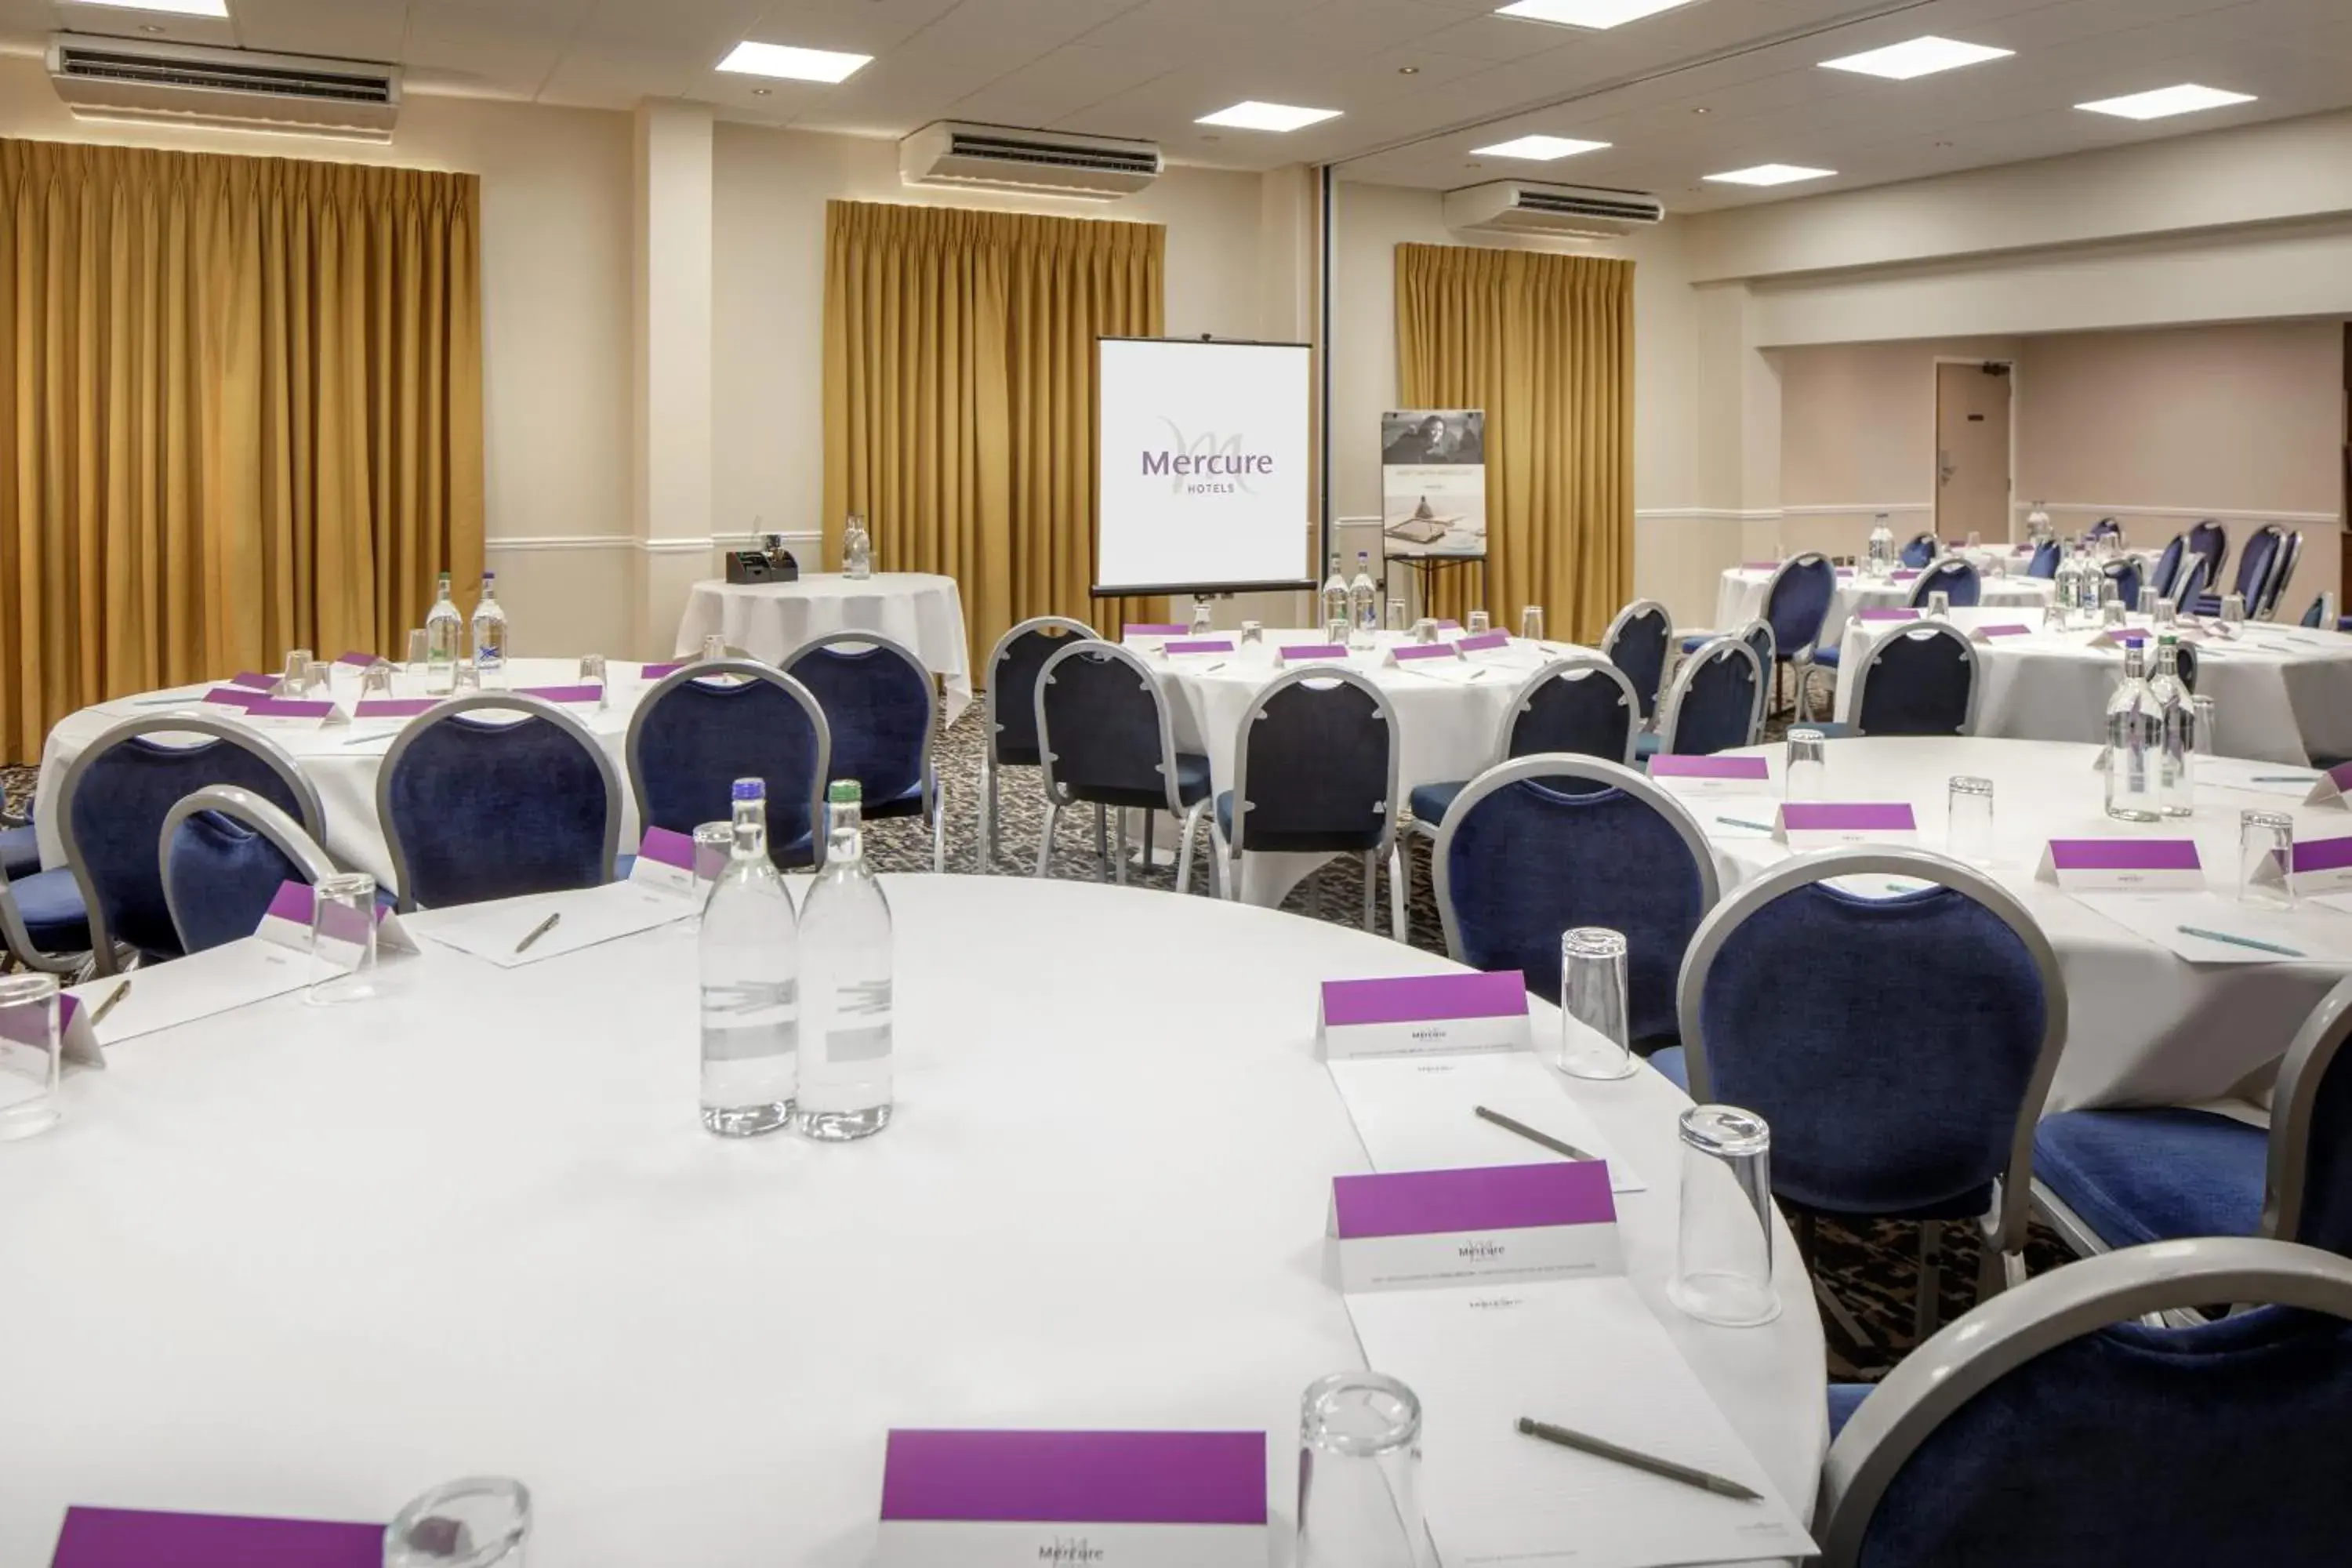 Banquet/Function facilities, Business Area/Conference Room in Mercure Hatfield Oak Hotel